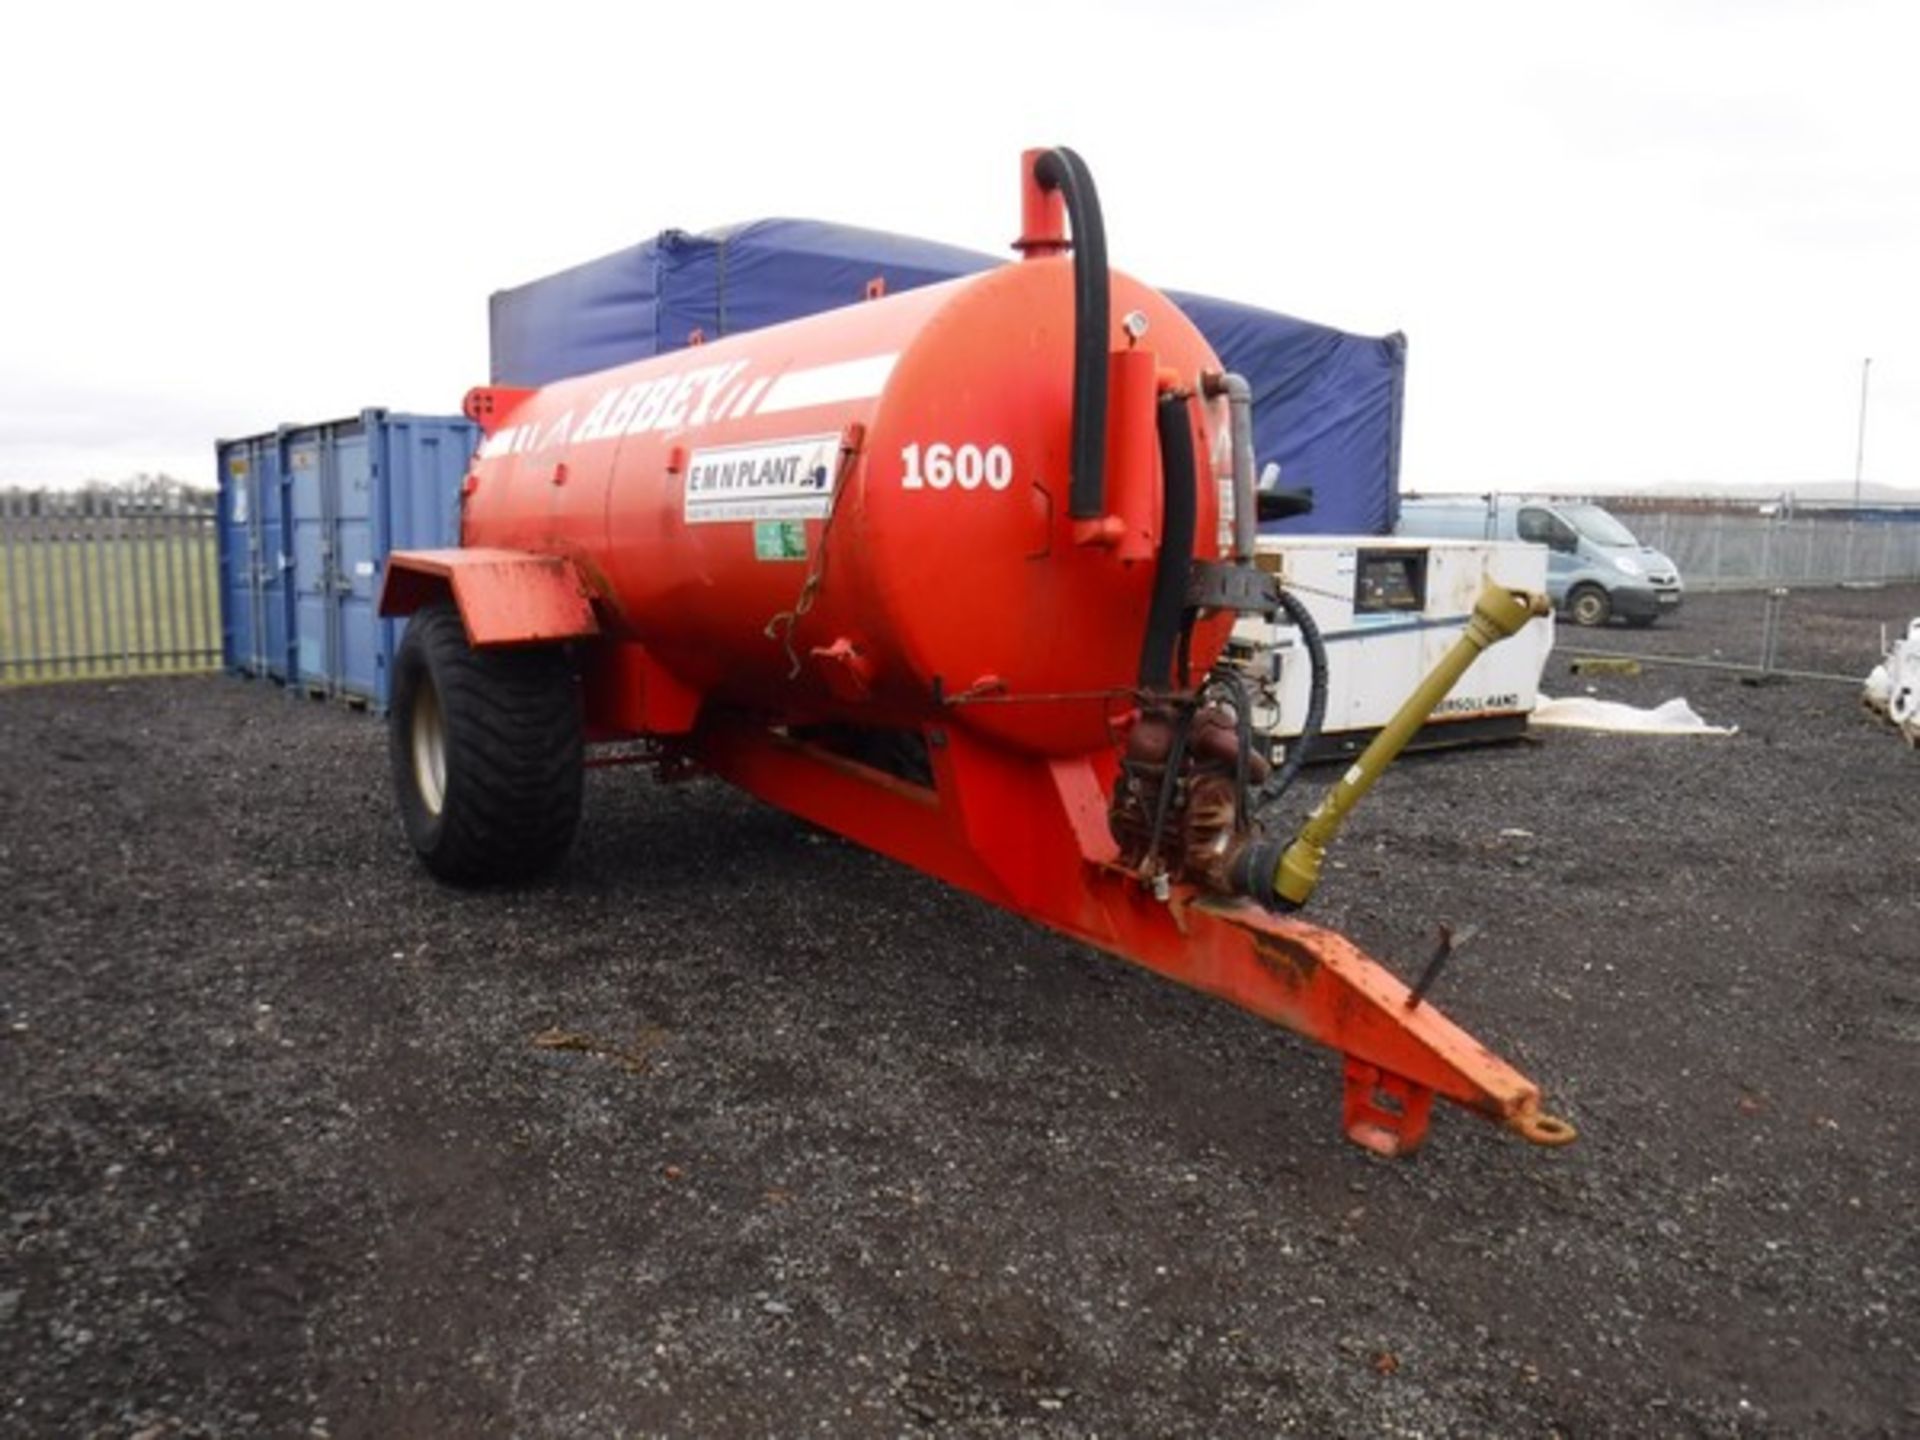 2014 ABBEY MACHINERY water tank. S/N 447830 - Image 4 of 11